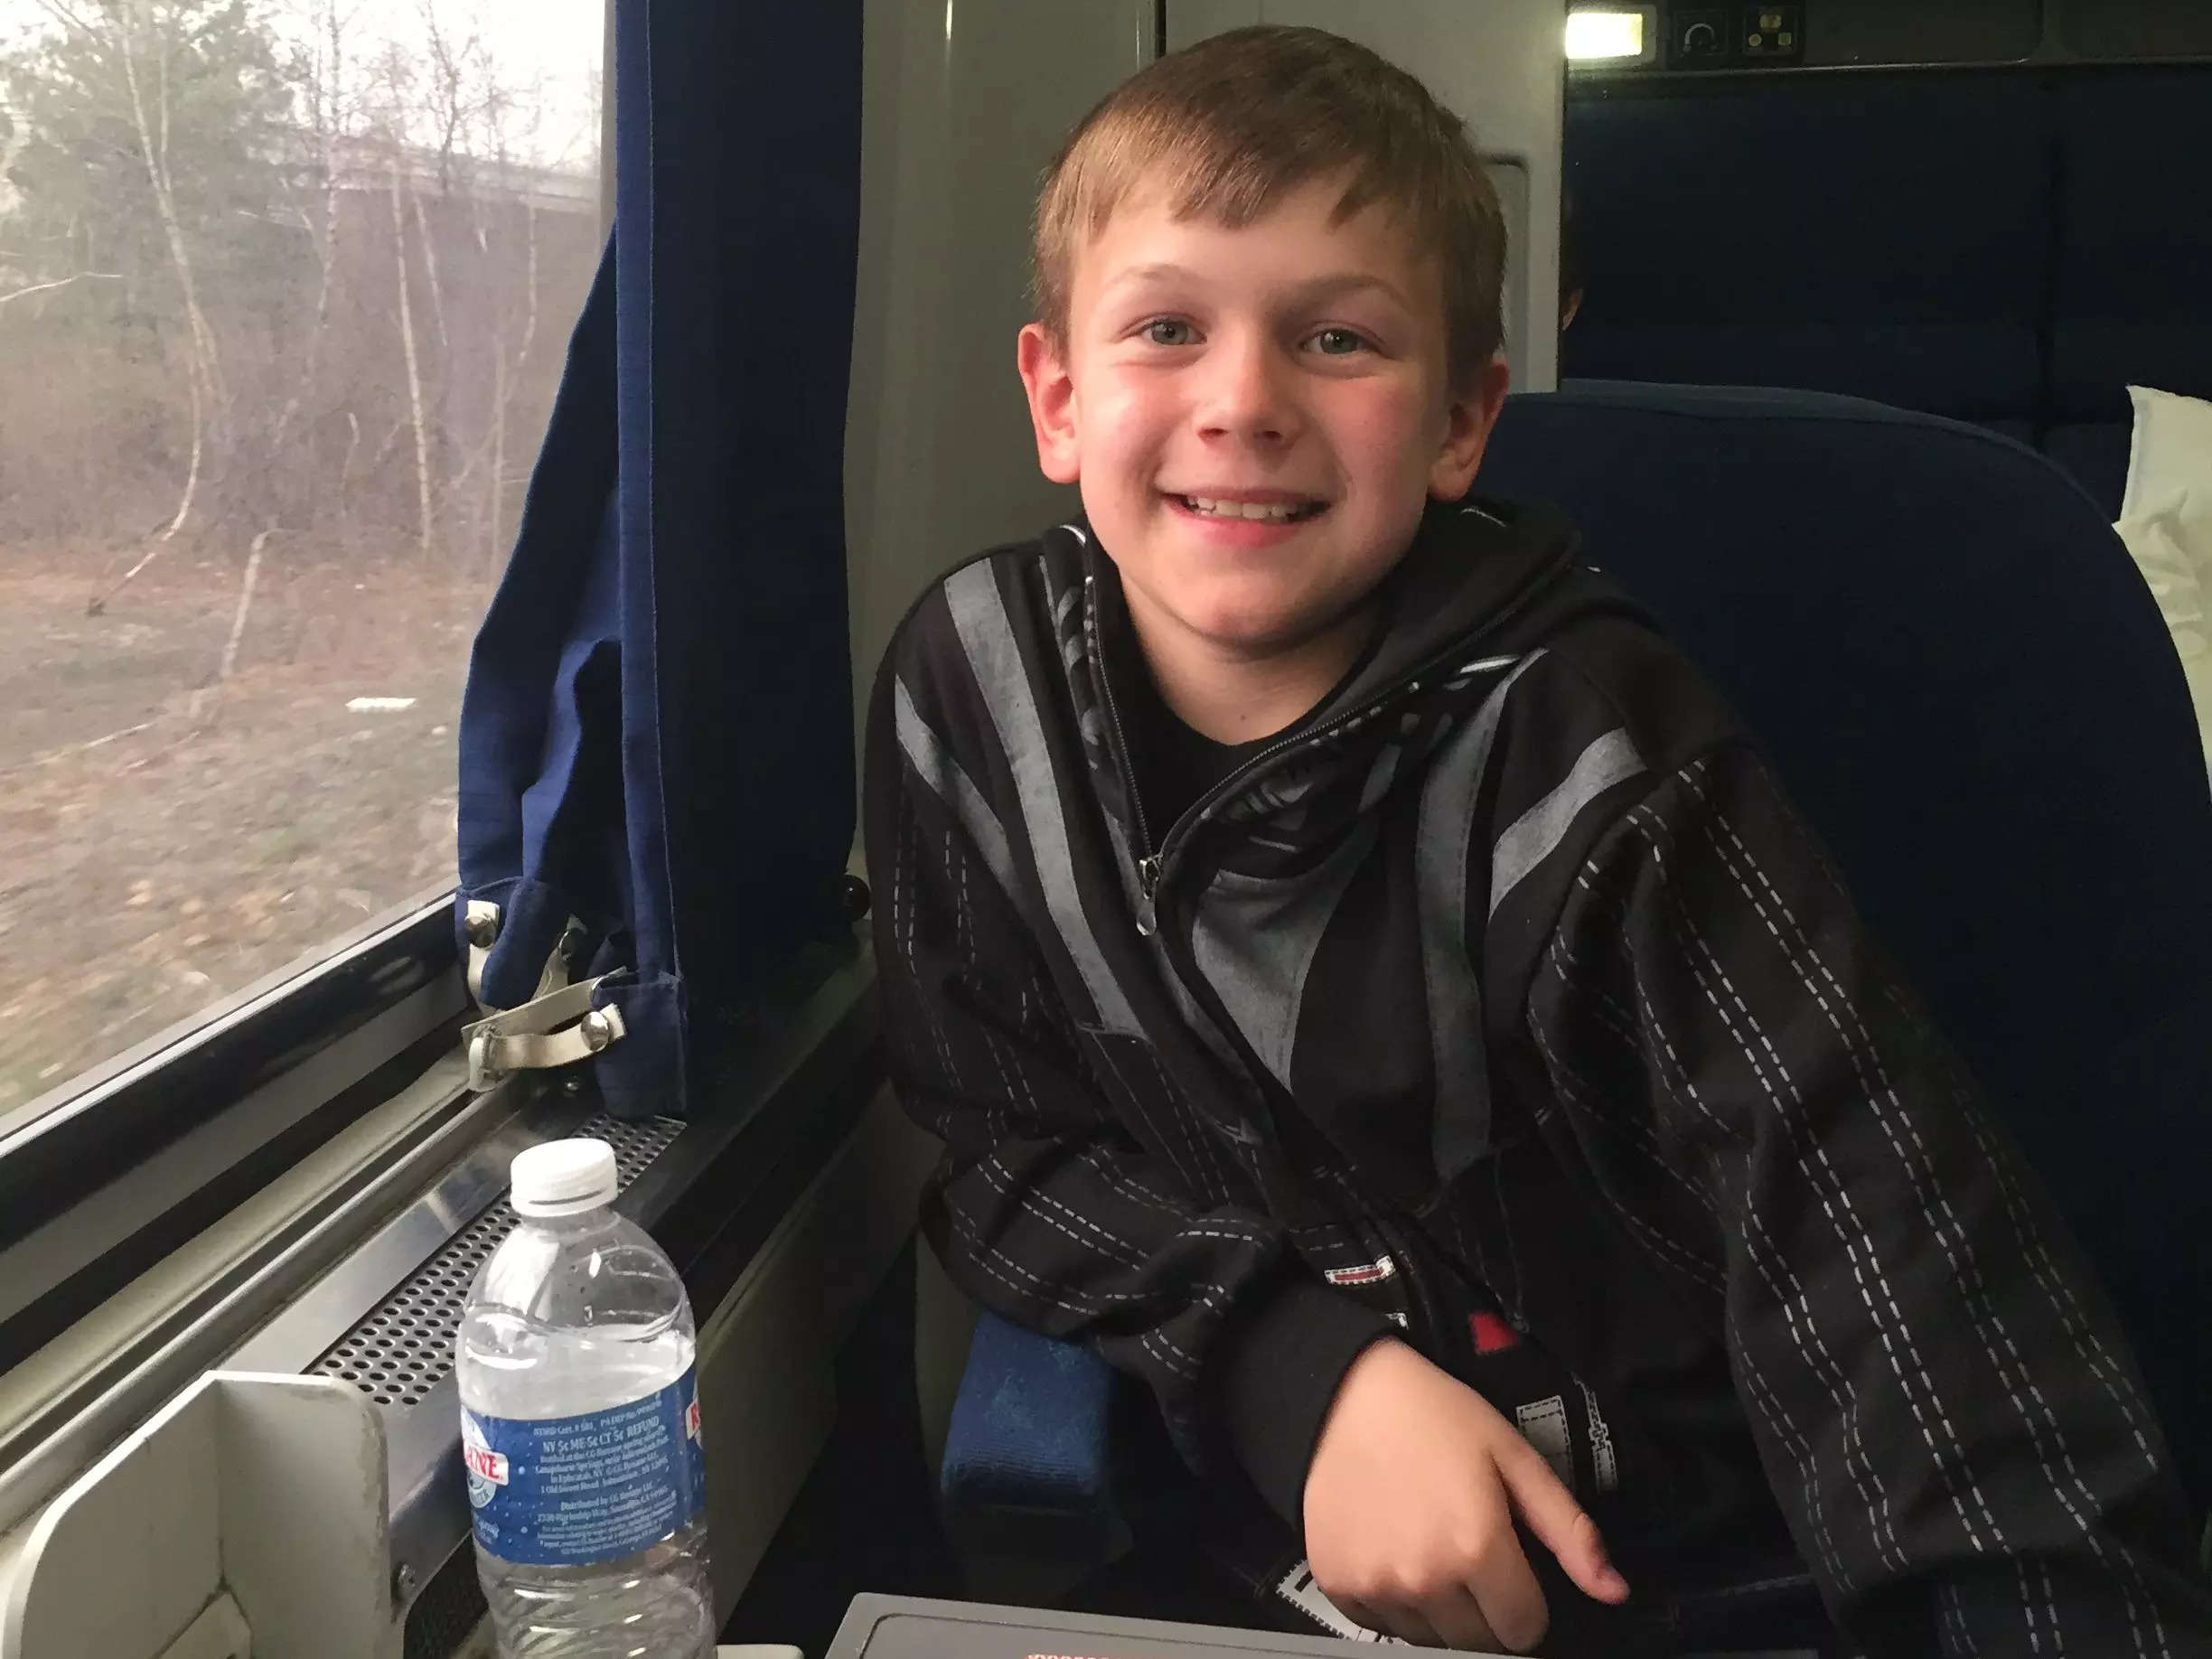 A boy seated on a train next to a window, smiling.